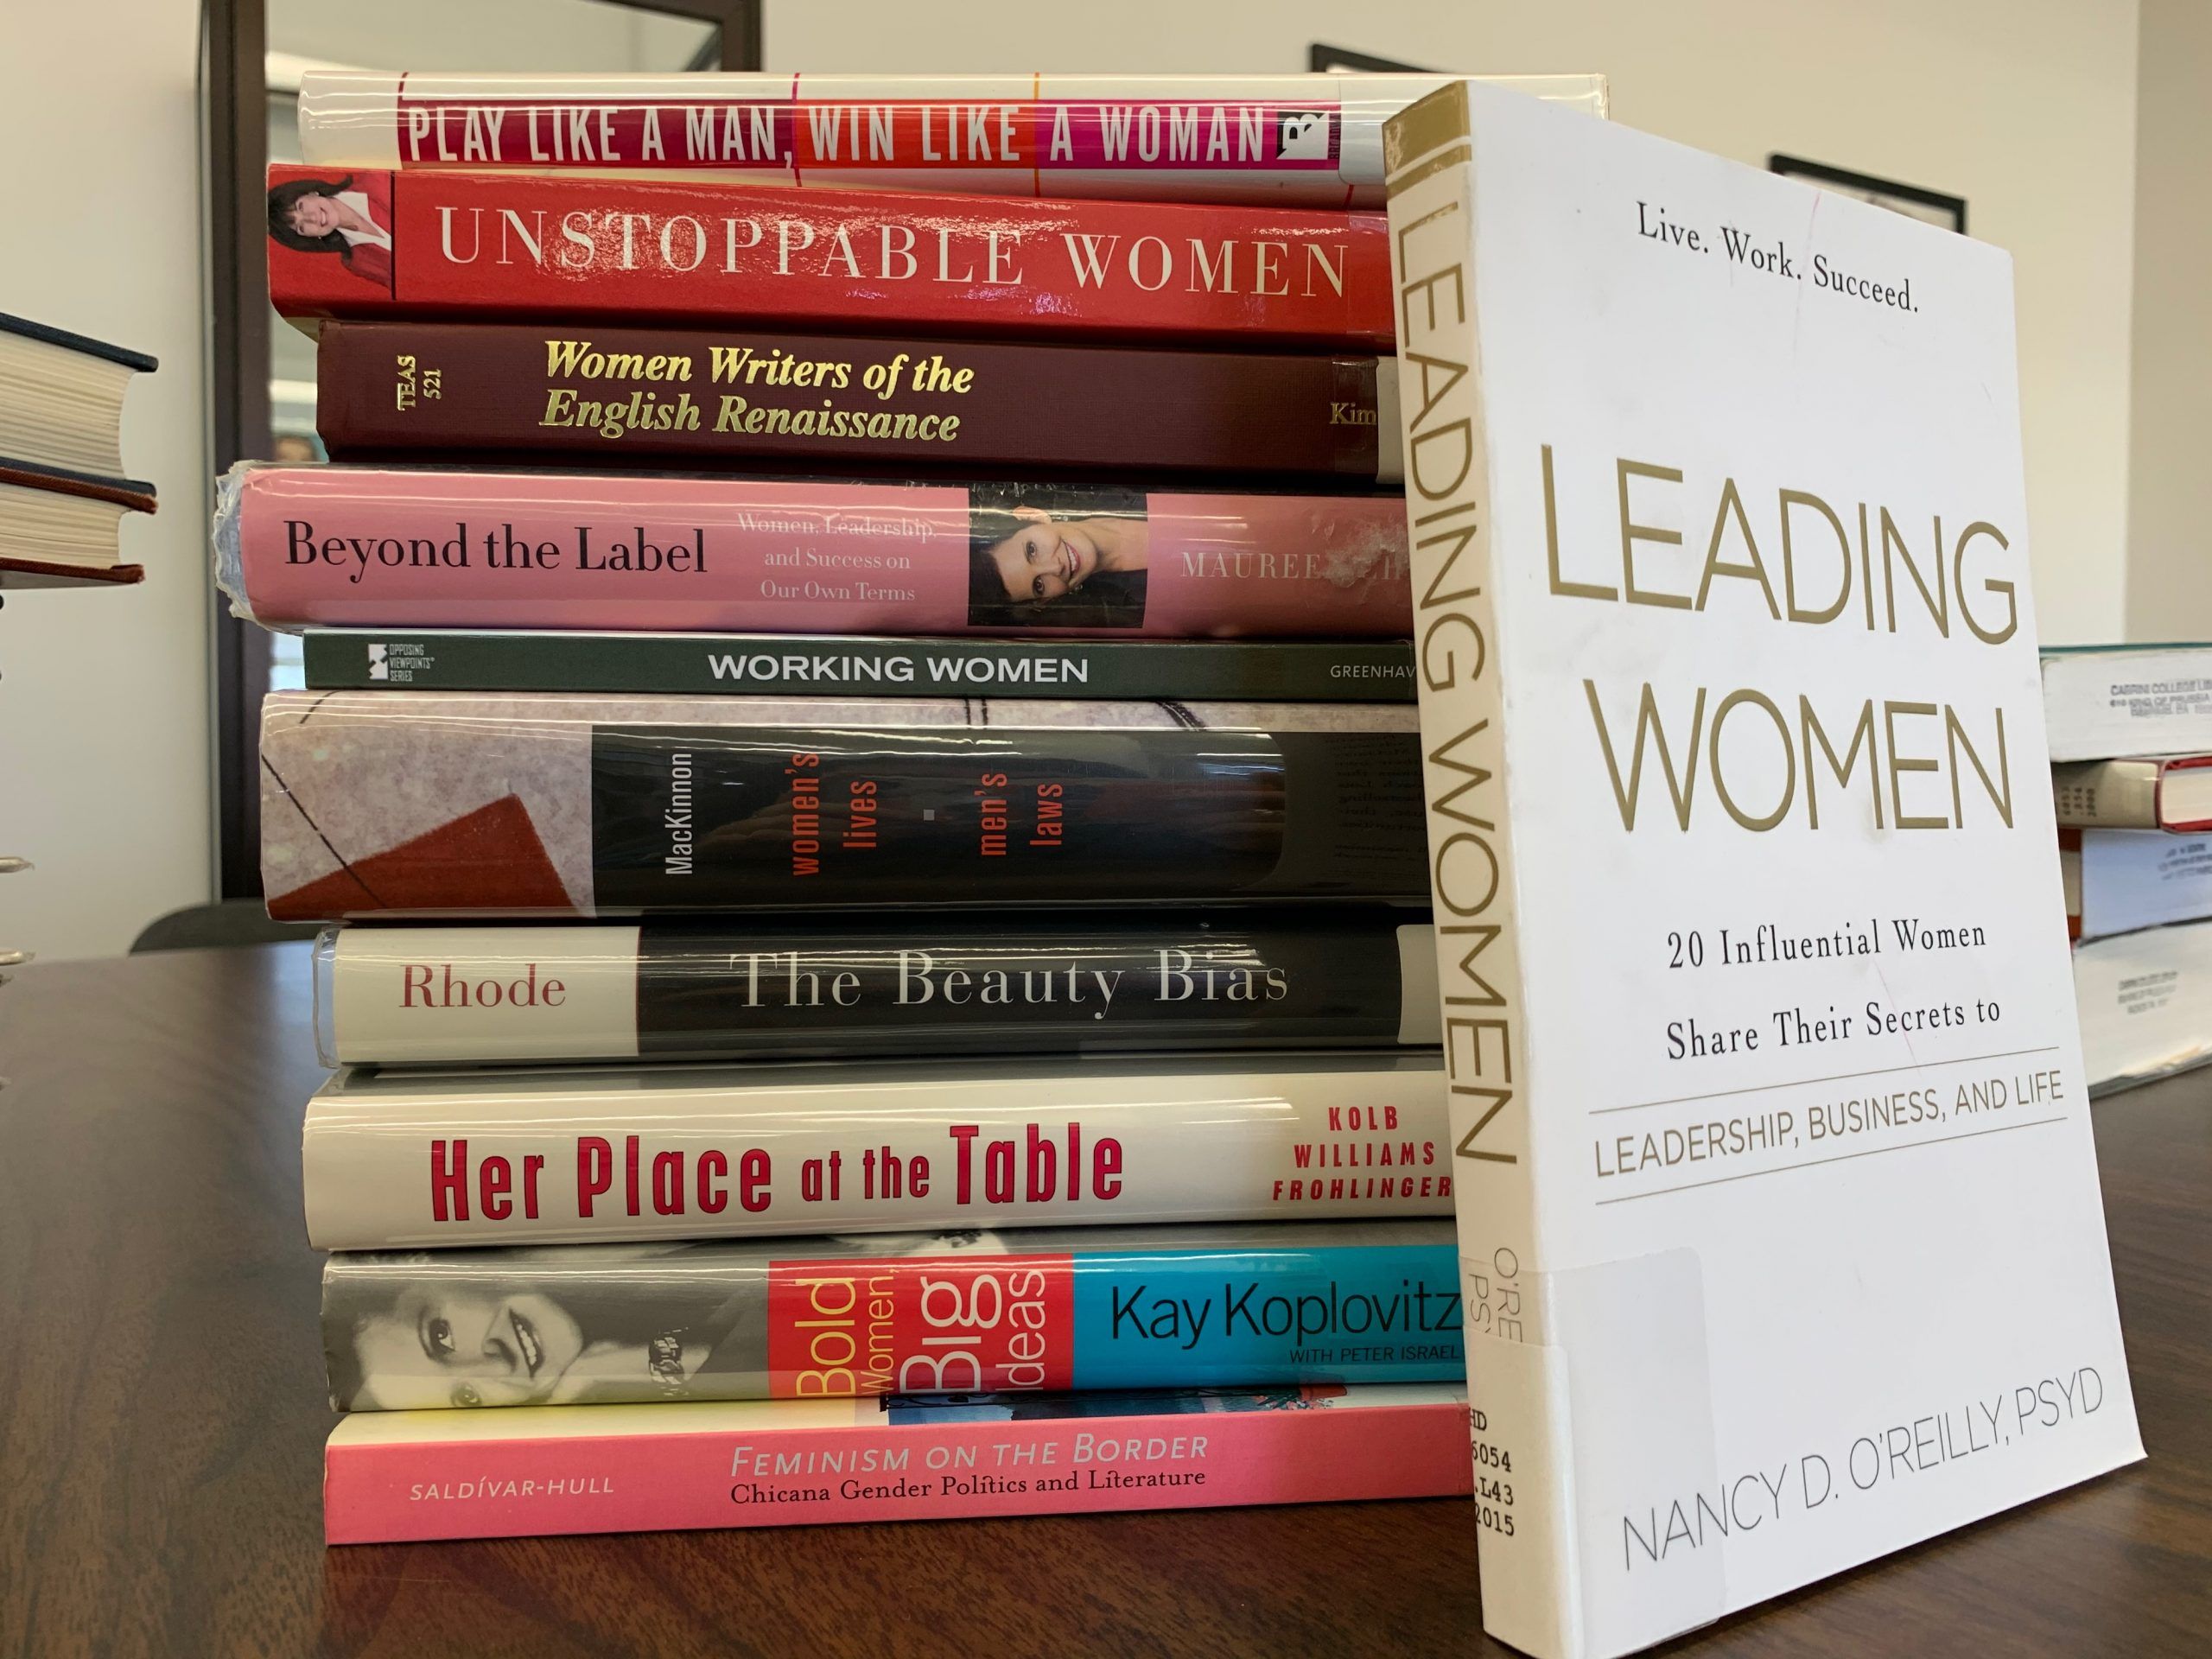 Books about female leadership. Photo by Gabrielle Cellucci